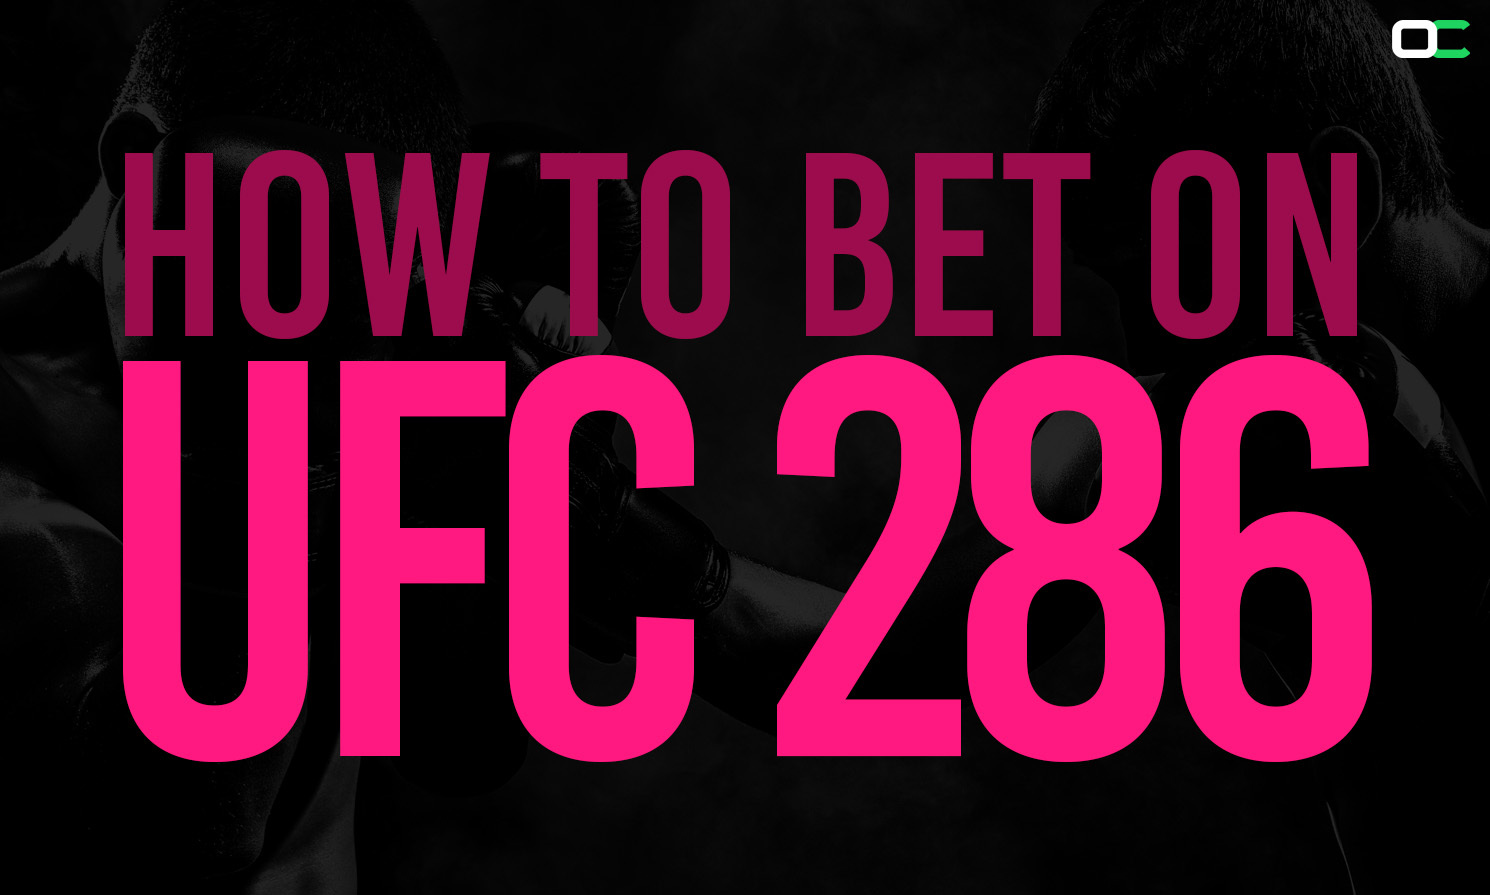 How to Bet on UFC 286